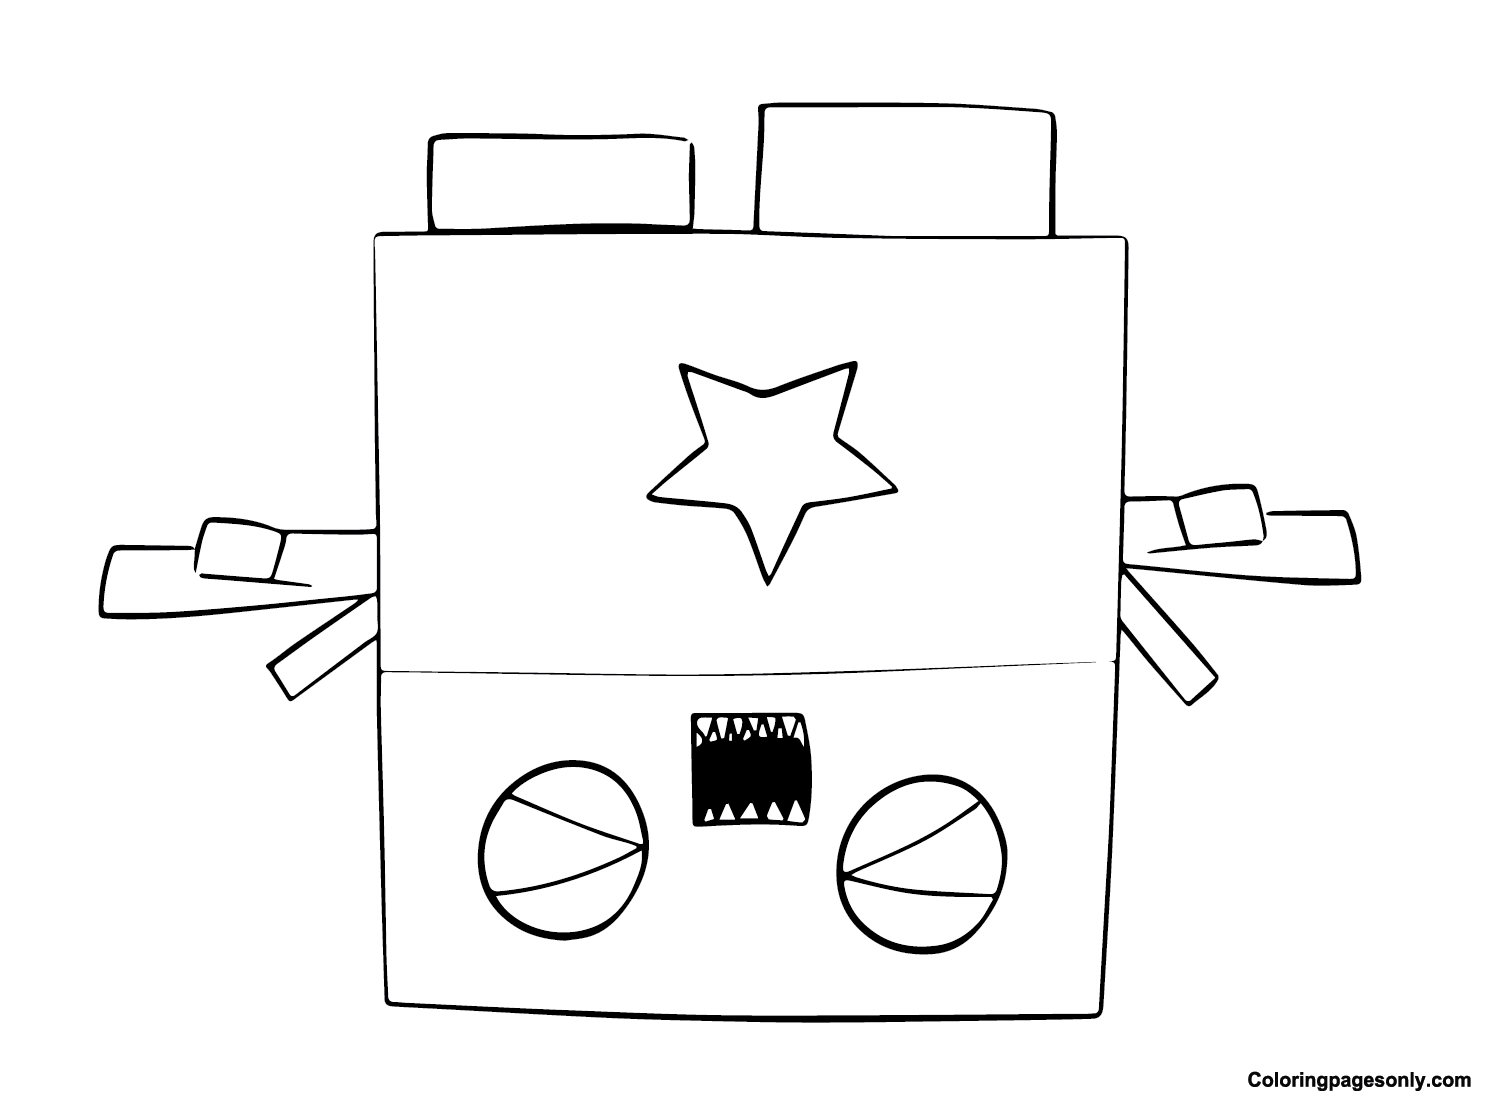 Boxy Boo Drawing Coloring Pages